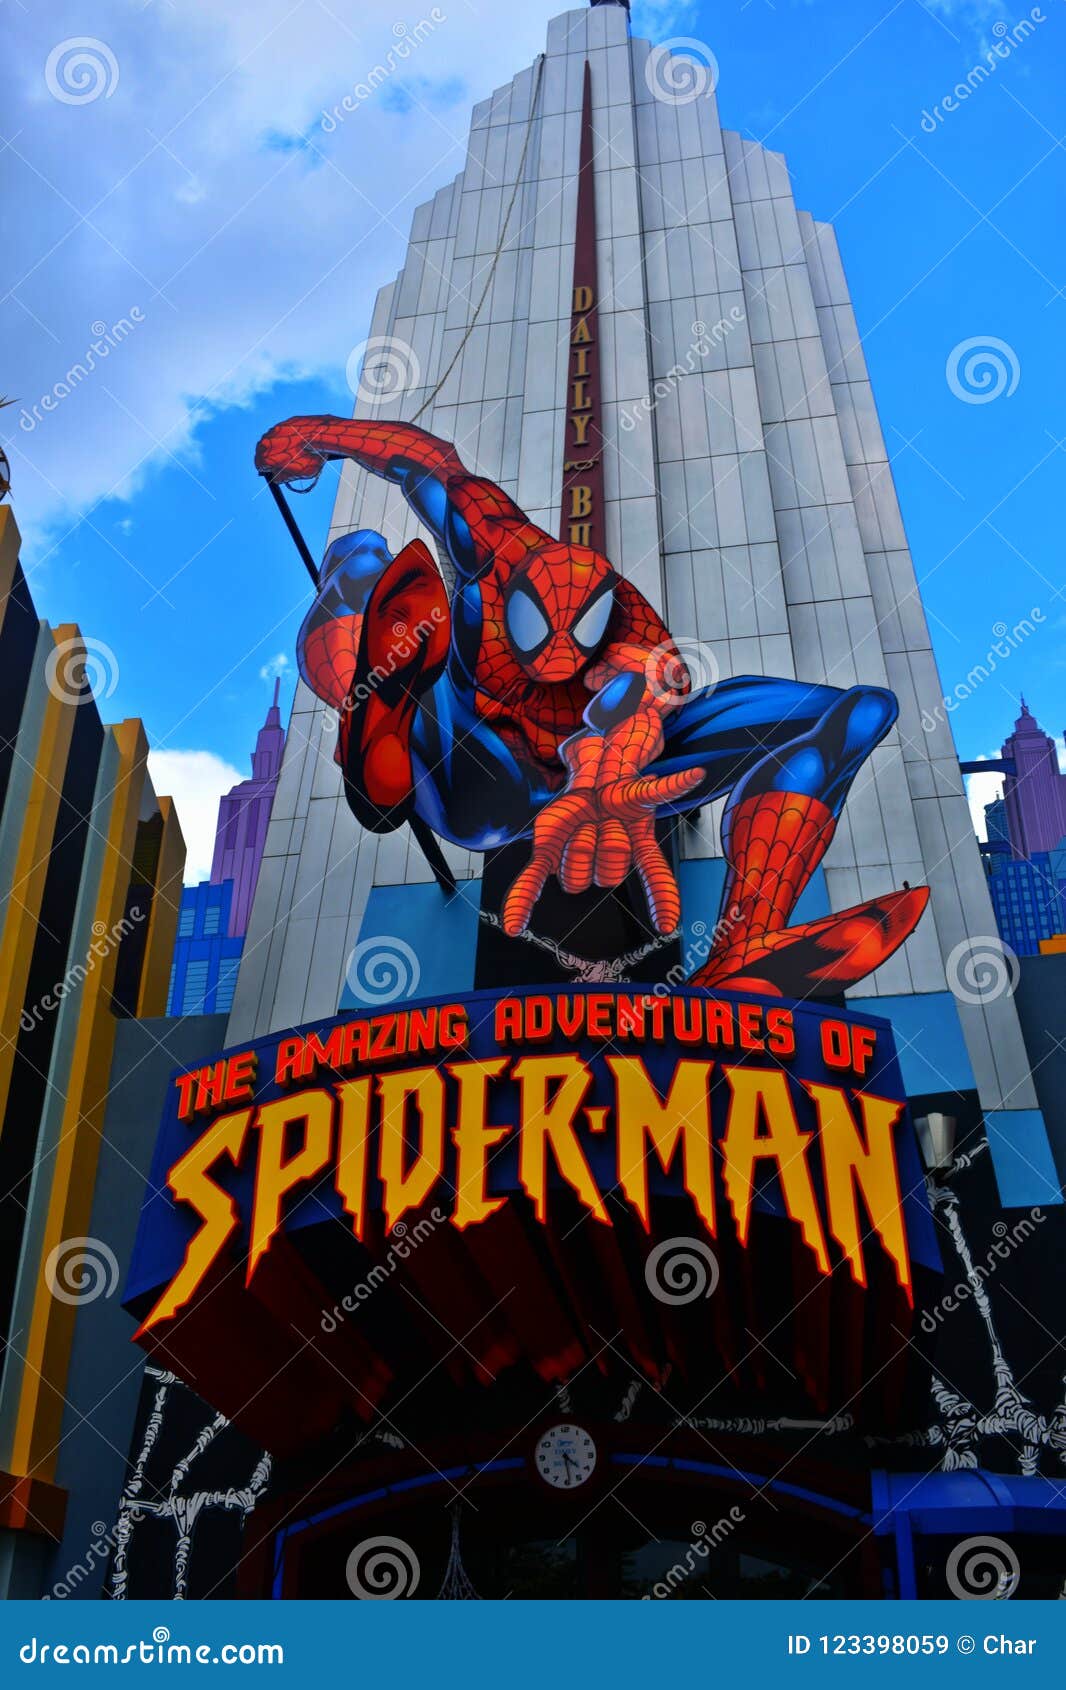 The Amazing Adventures of Spider-Man at Universal`s Islands of Adventure  Editorial Stock Image - Image of ride, spiderman: 123398059